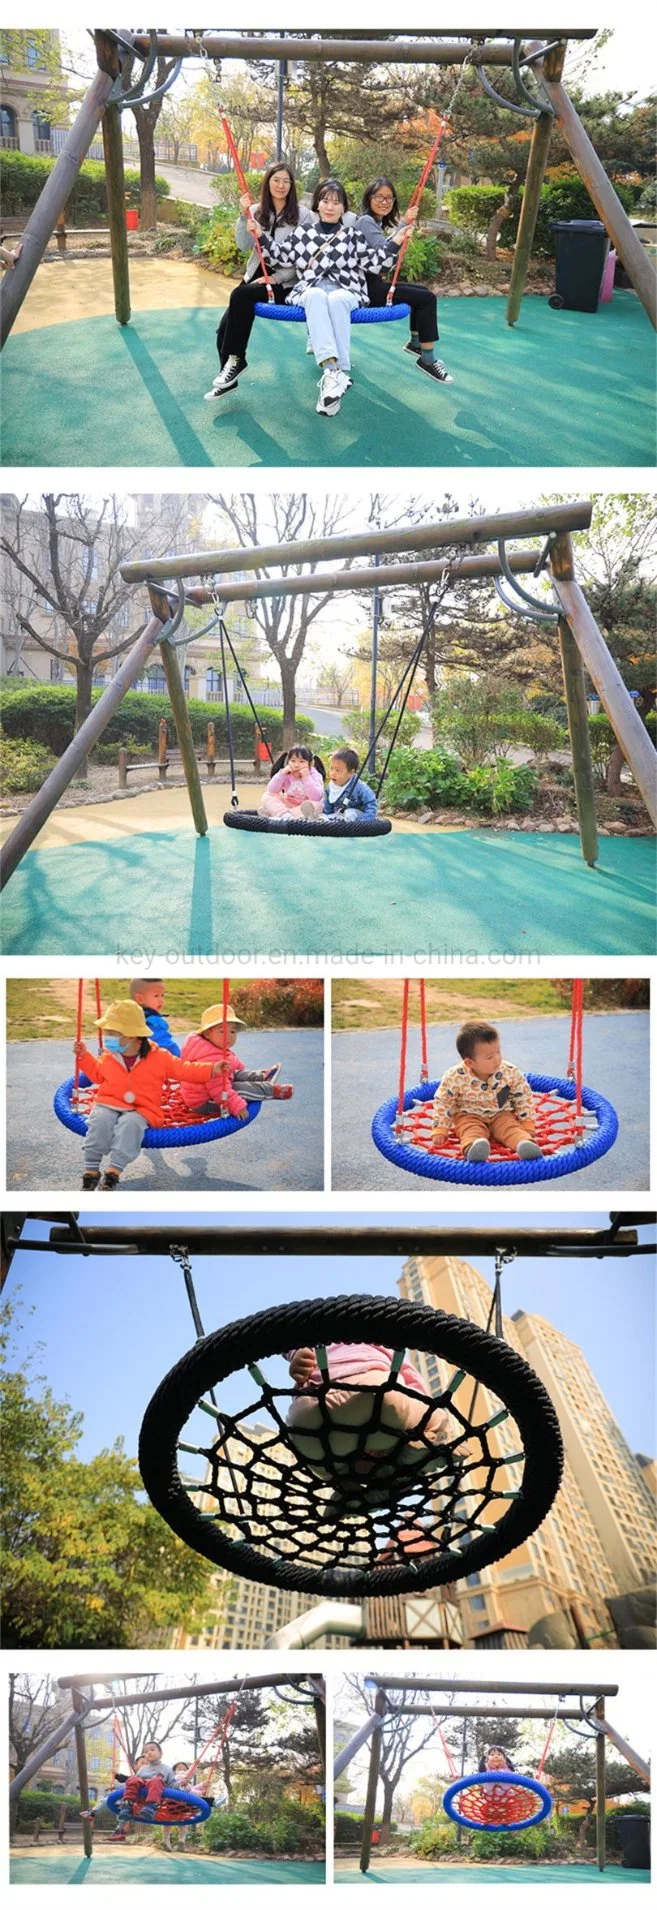 New Design Portable Garden Camping Playground Kids Hammock Round Hanging Patio Swing with Chair